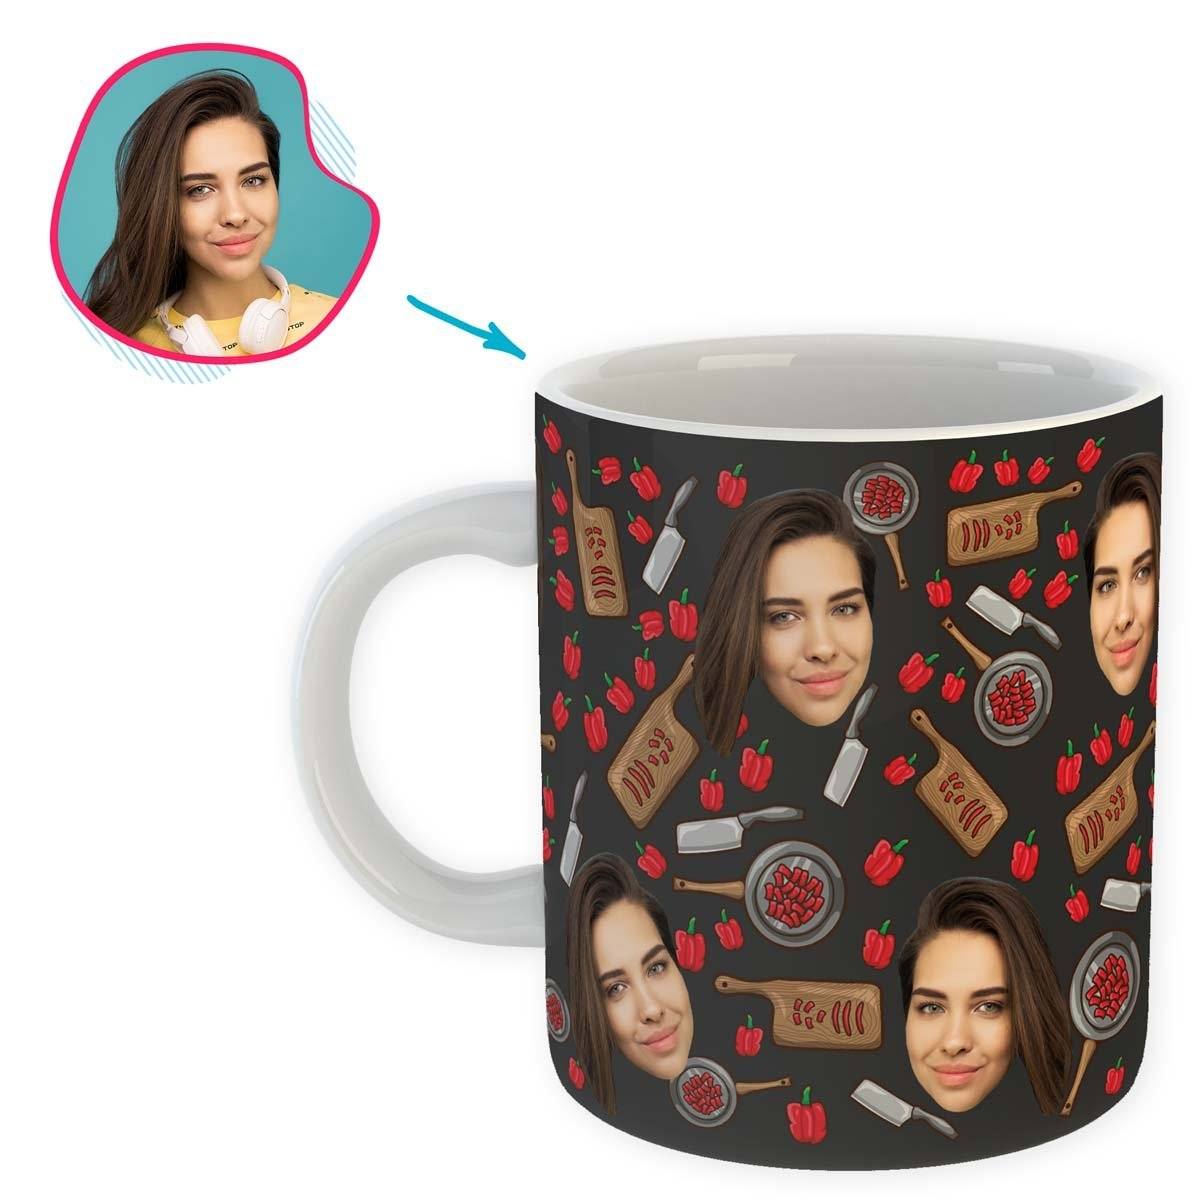 dark Сooking mug personalized with photo of face printed on it